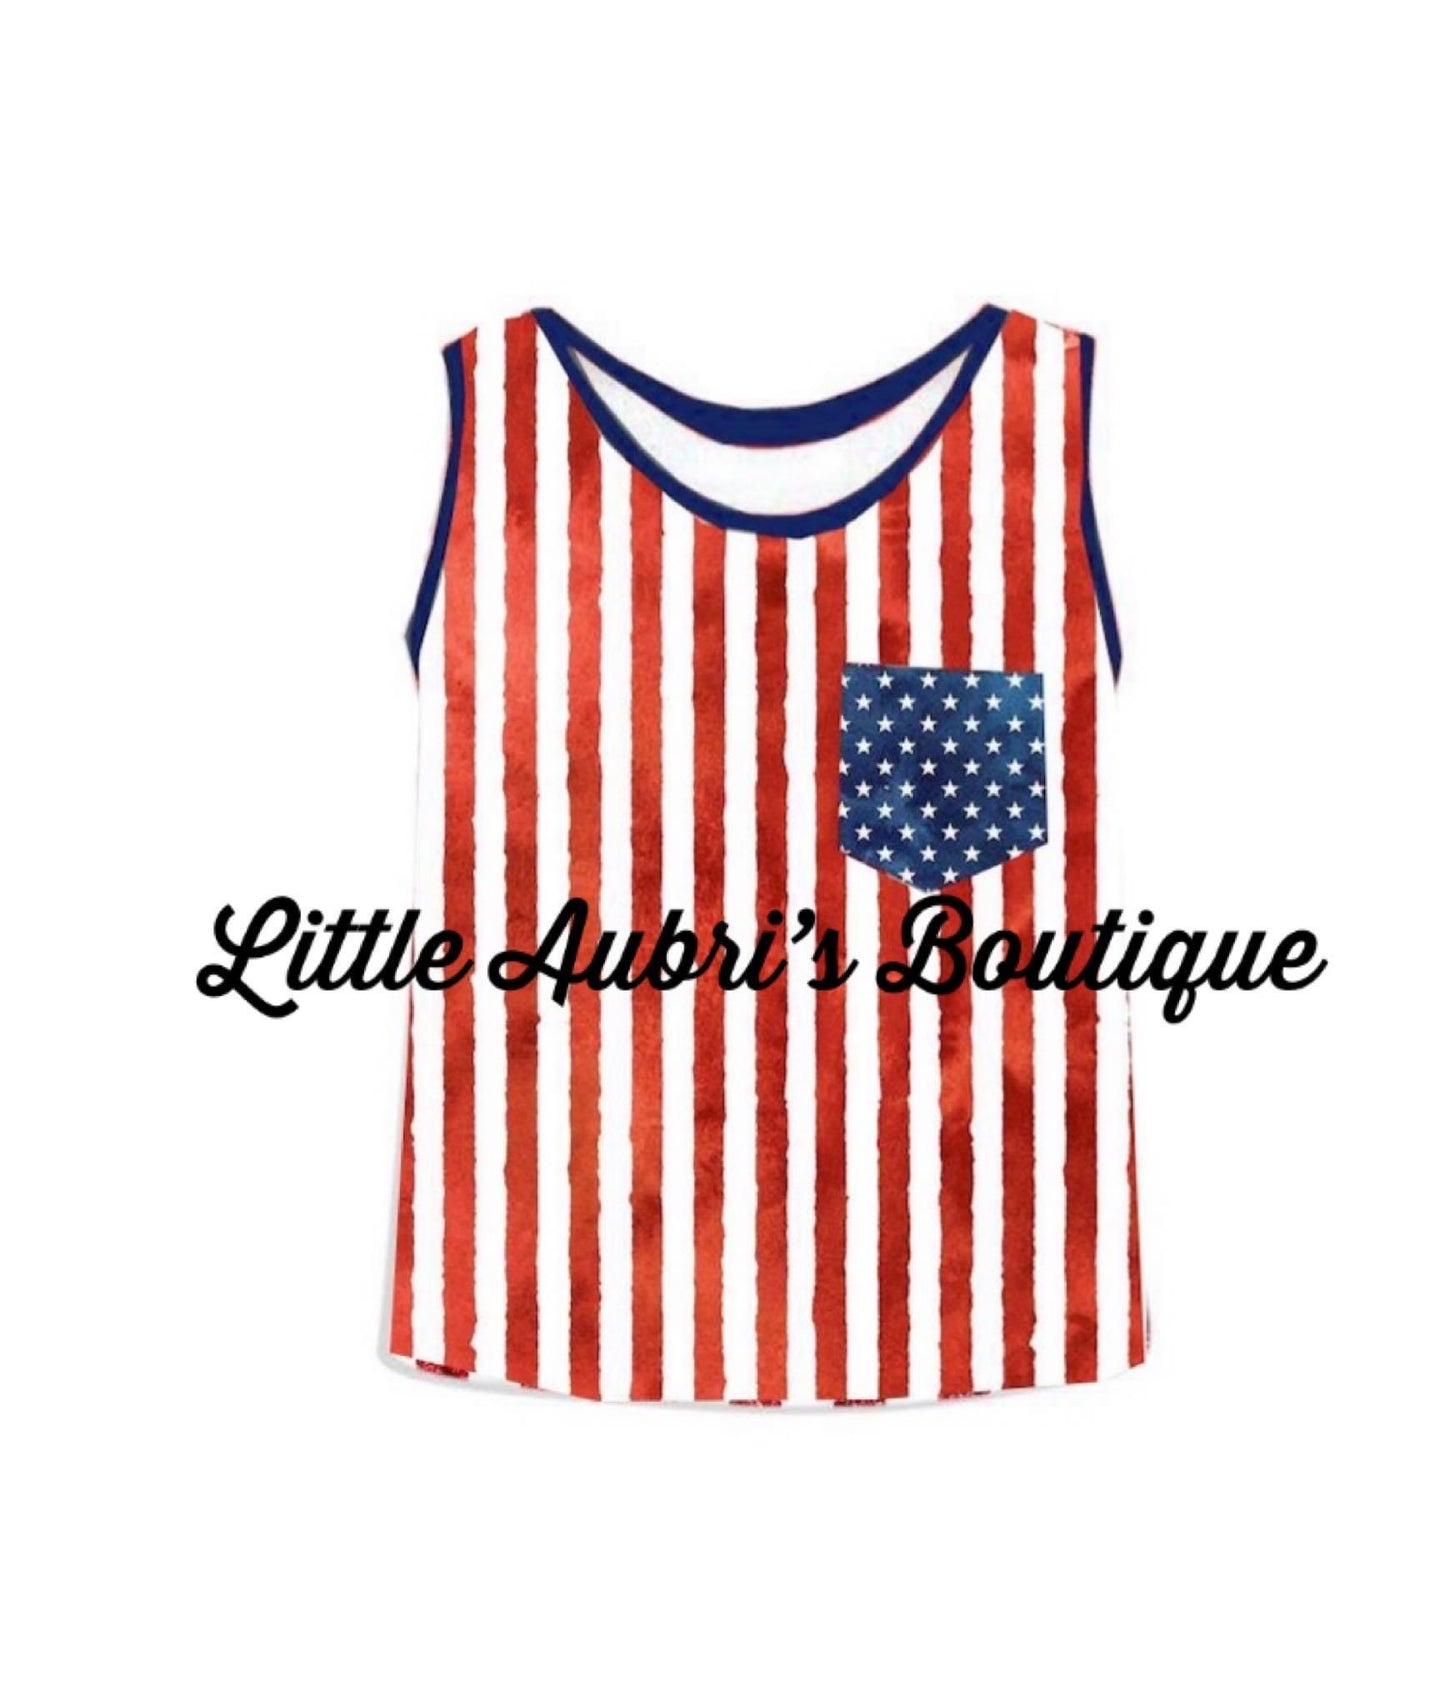 All American Style 1 Adult Unisex Tank